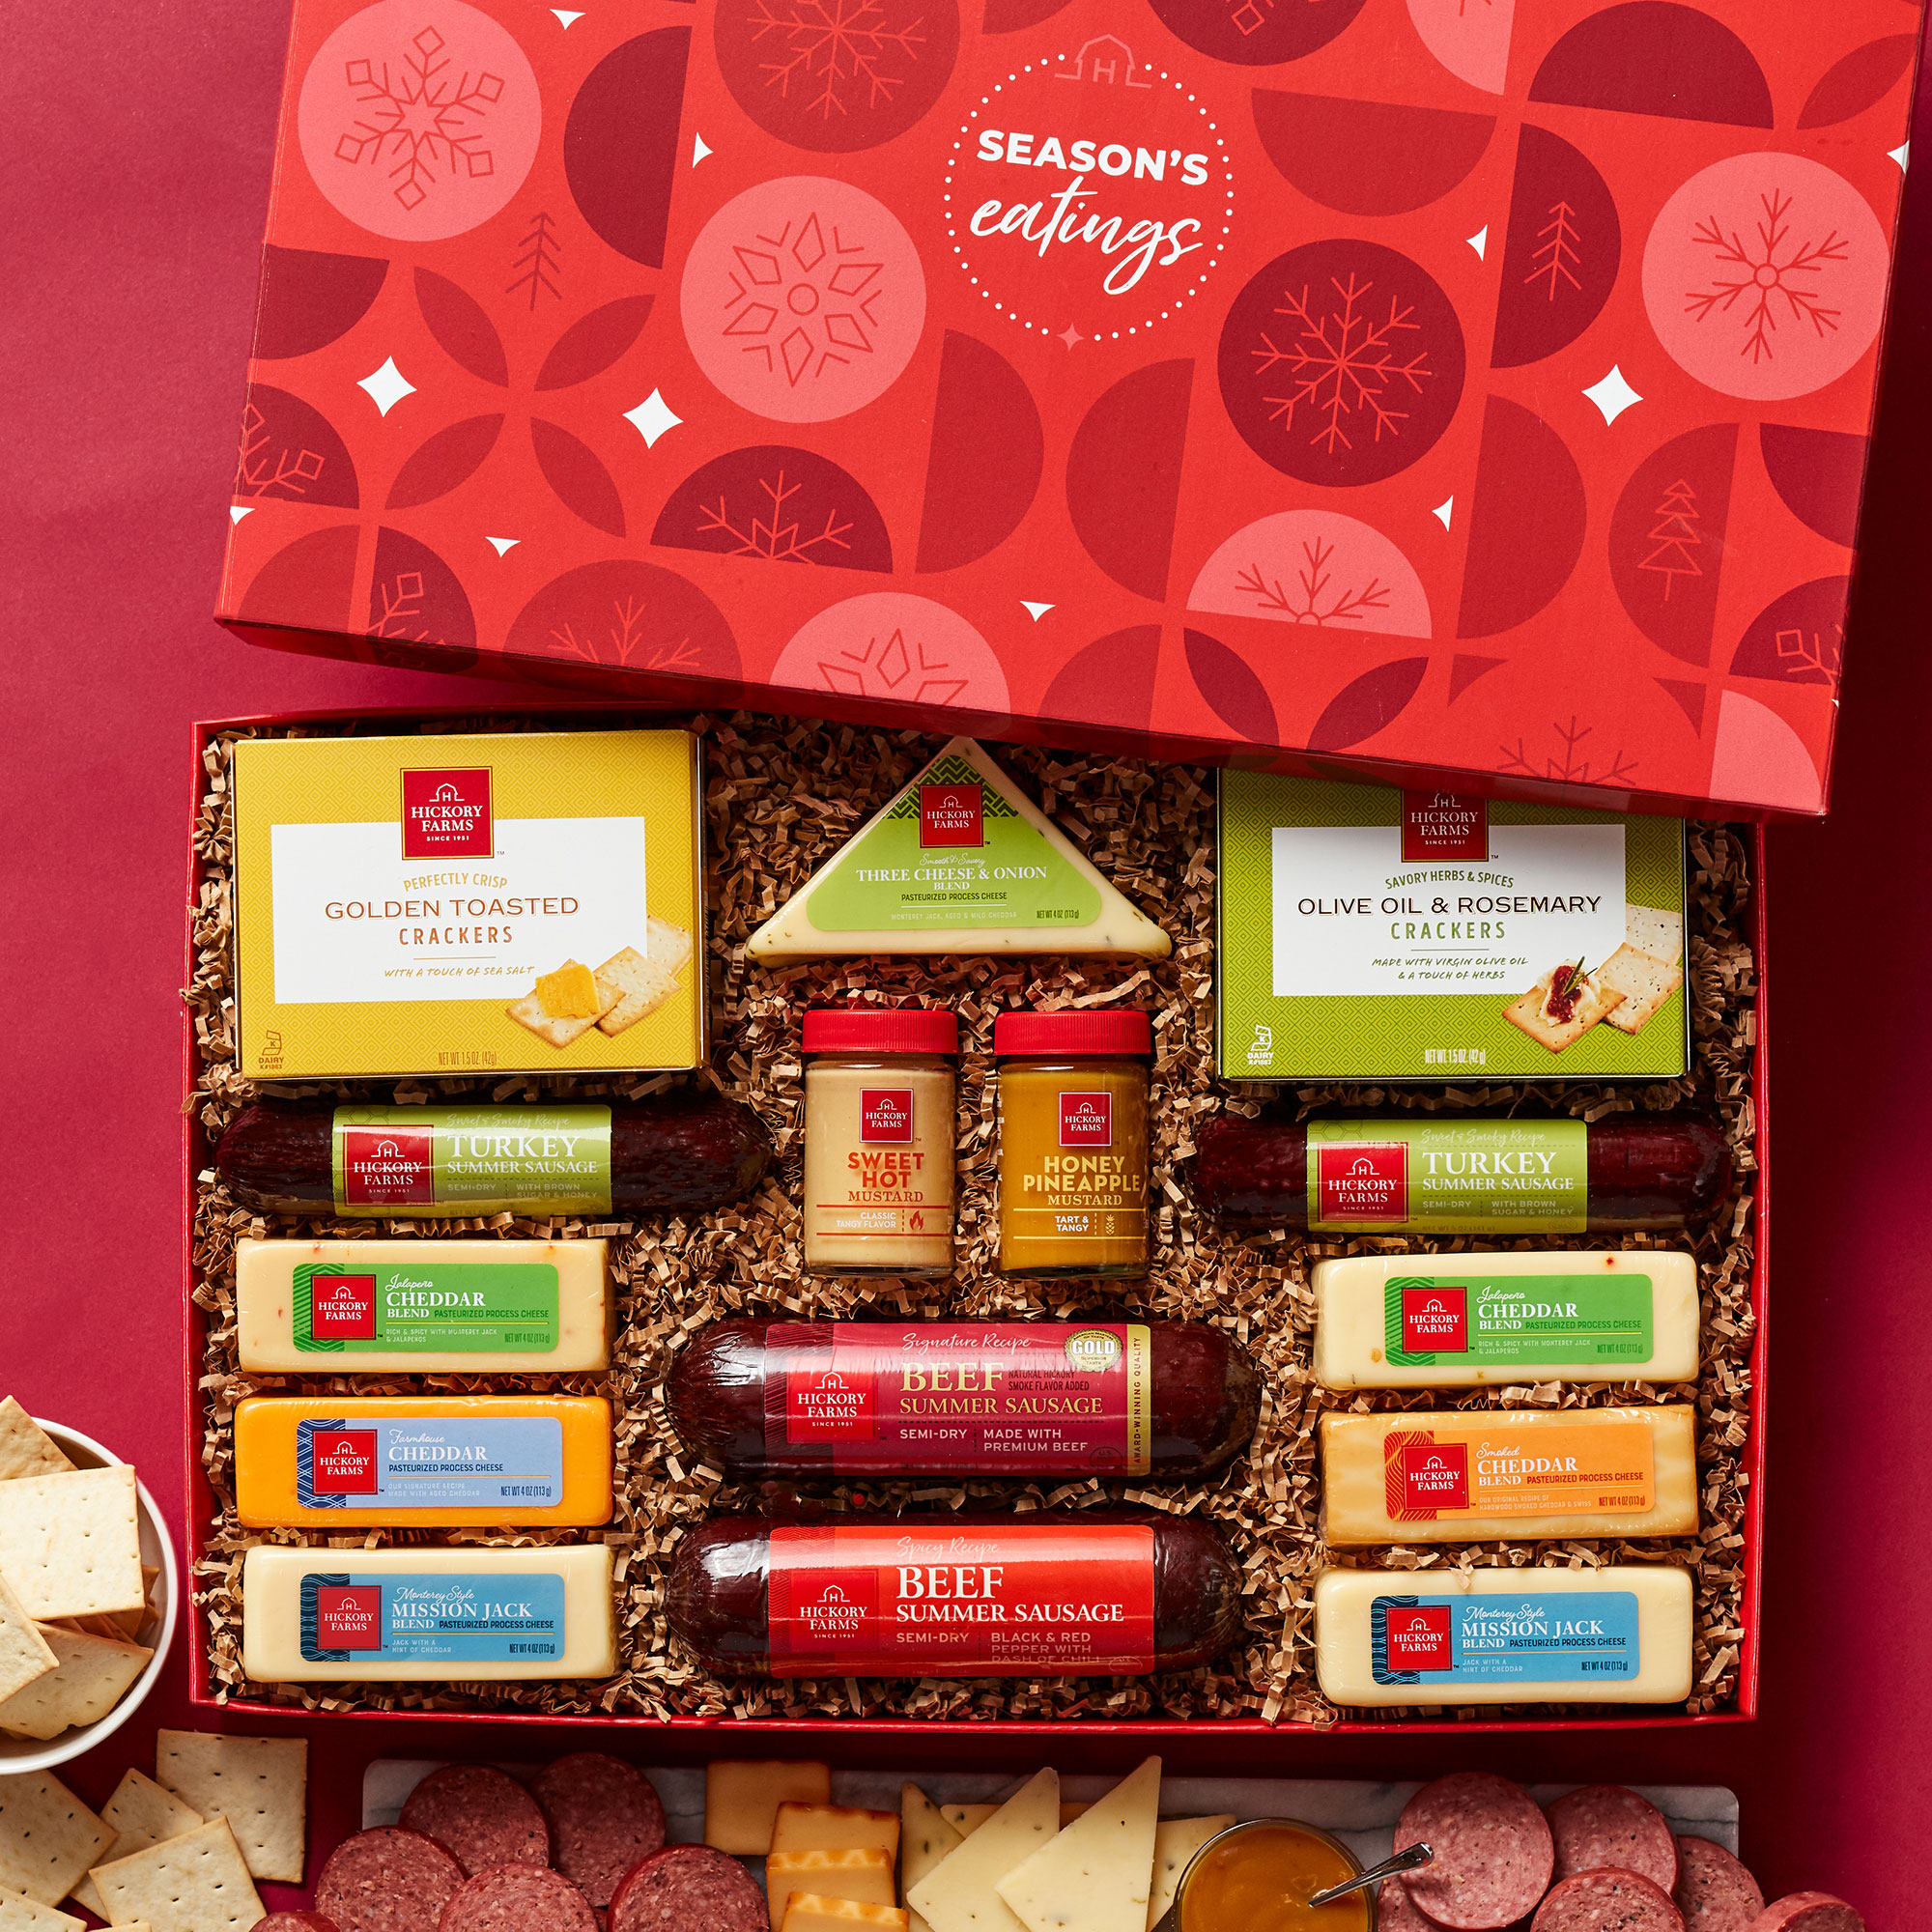 https://www.hickoryfarms.com/on/demandware.static/-/Sites-Web-Master-Catalog/default/dw49bd3b50/images/products/seasons-eatings-hearty-party-gift-box-003392-1.jpg